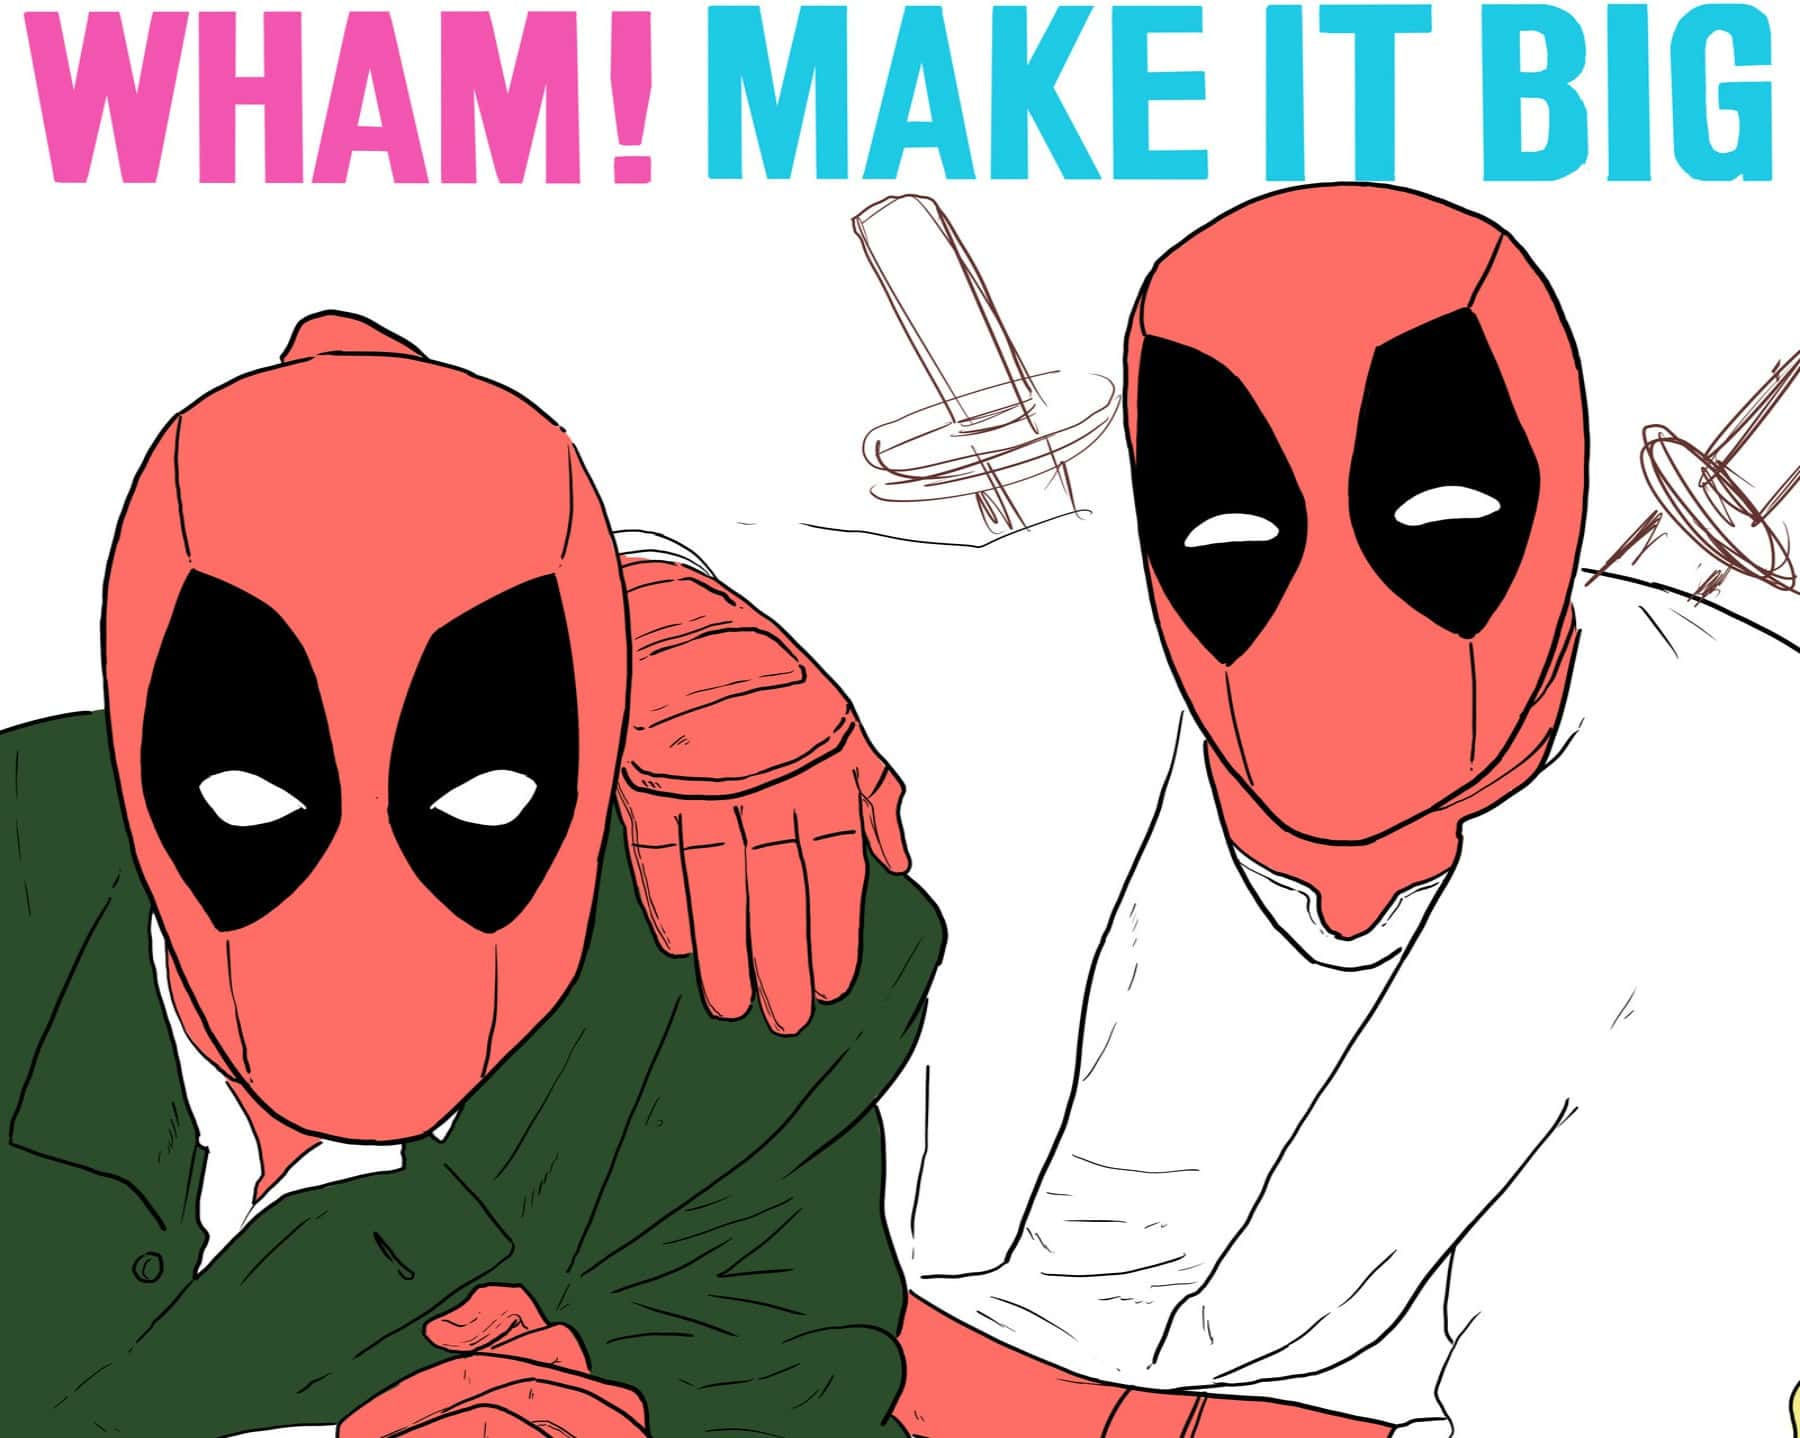 44 Wisecracking Facts About The Deadpool Movies